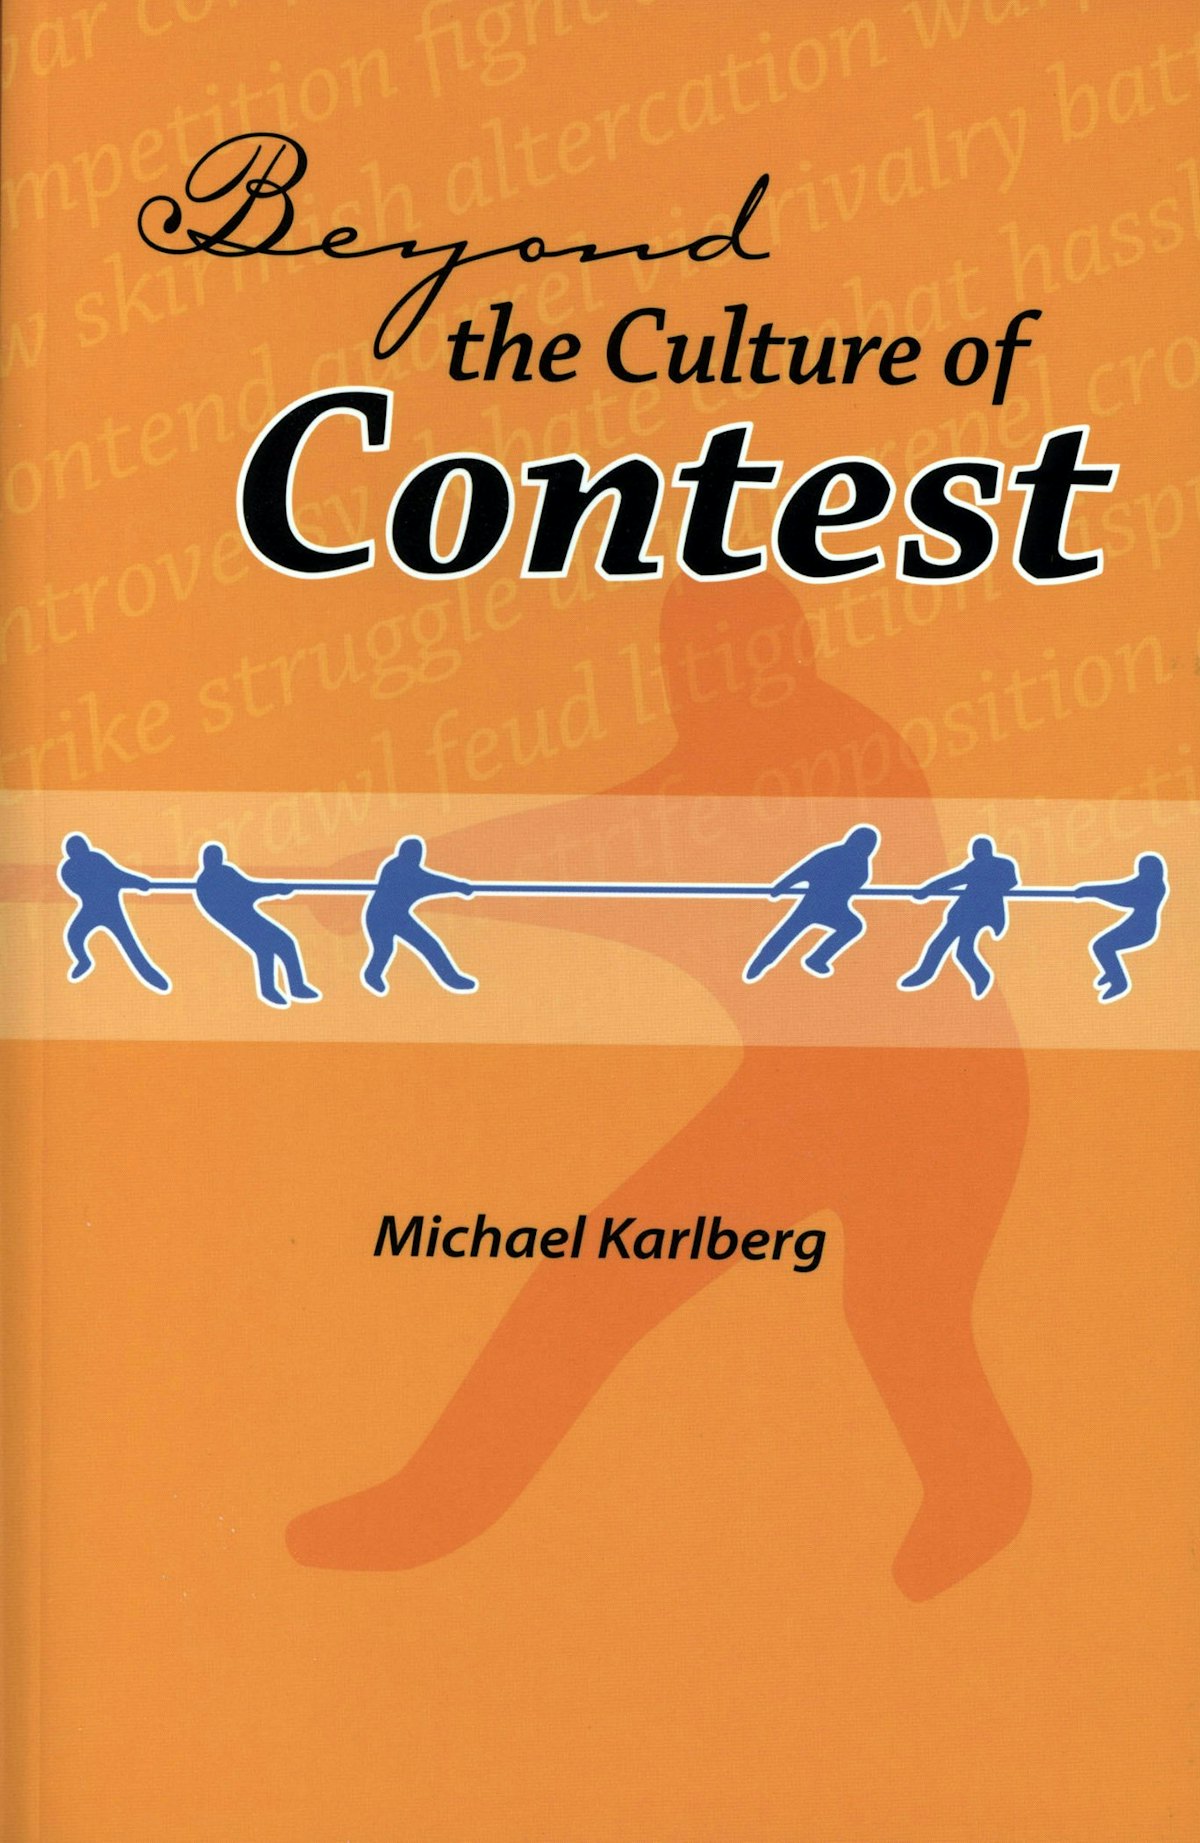 The front cover of "Beyond the Culture of Contest" by Michael Karlberg.